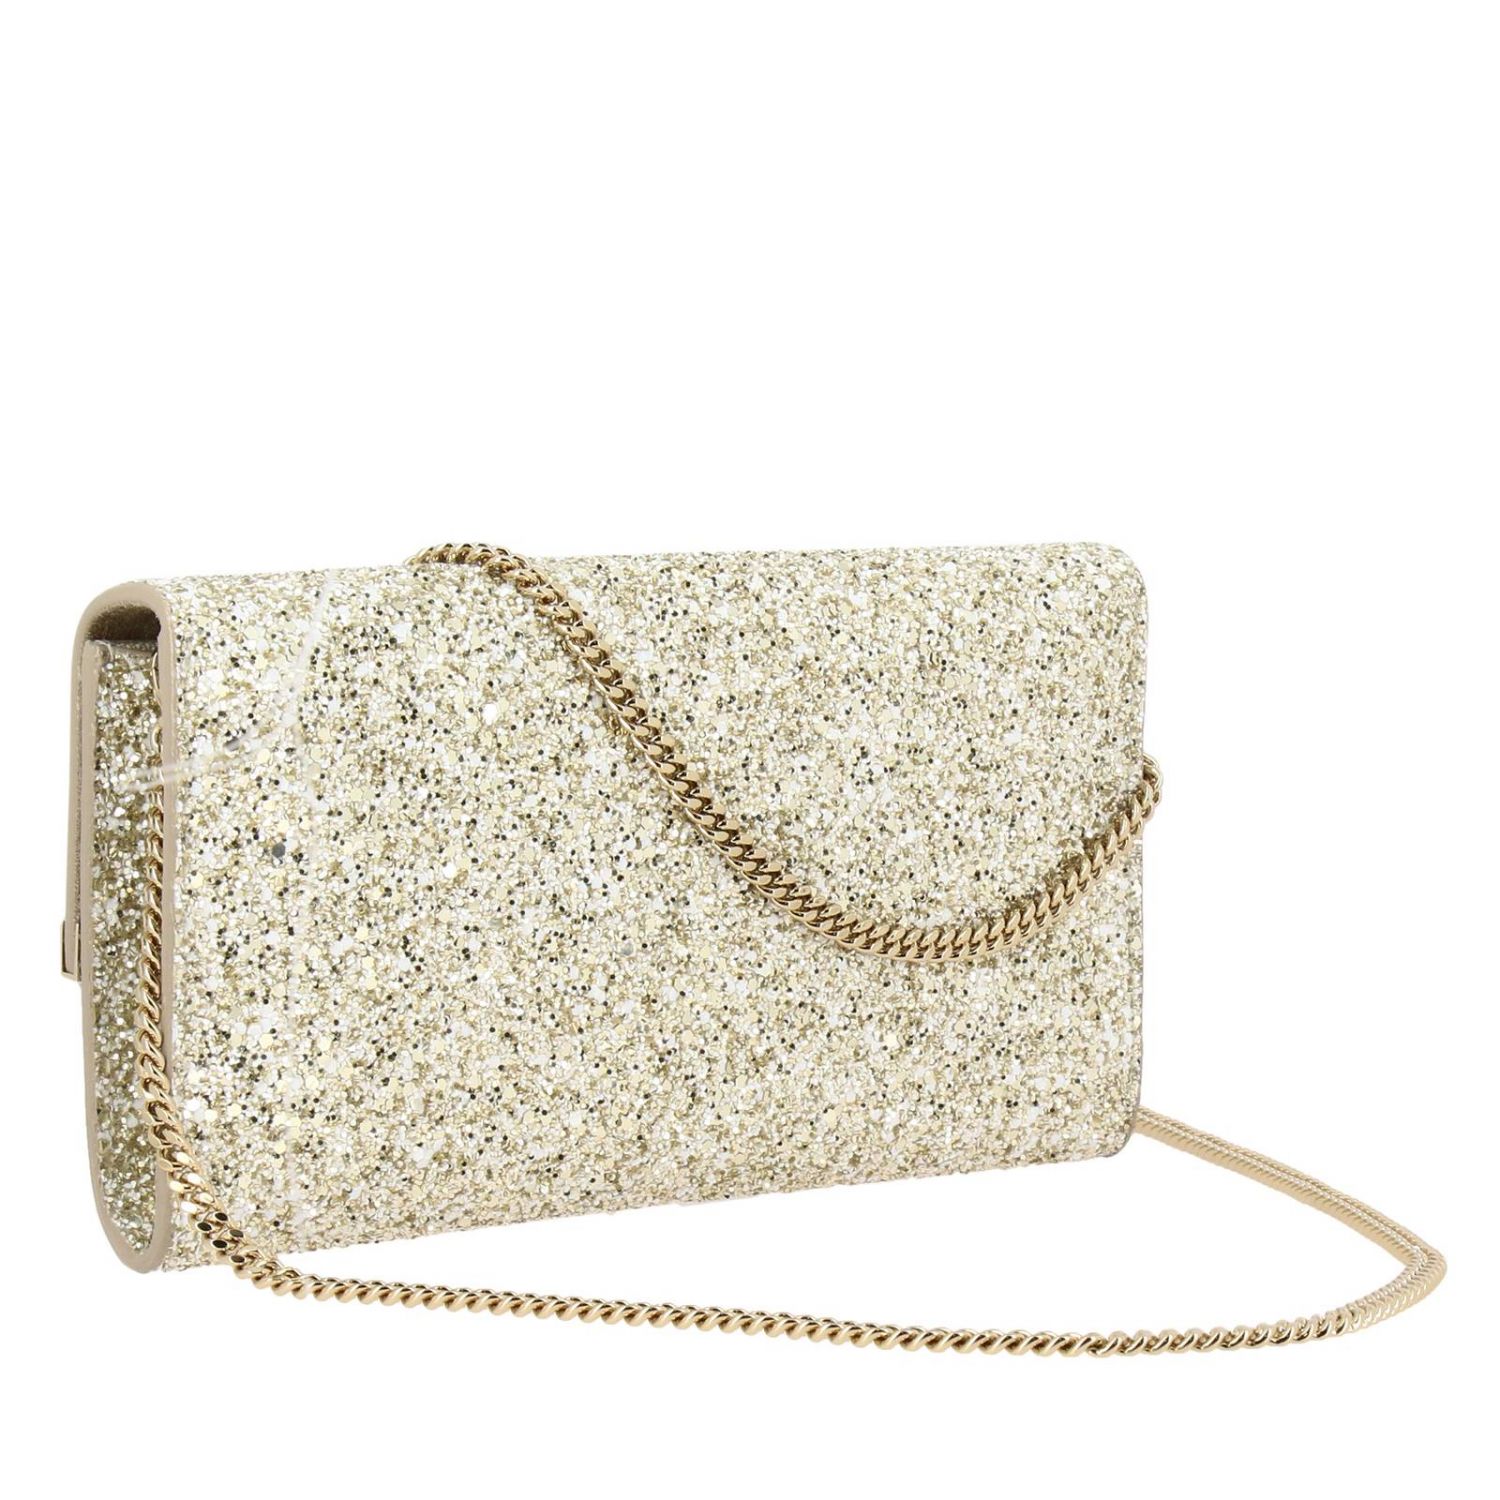 Emmie Jimmy Choo glitter clutch with asymmetrical metallic finish and  removable shoulder strap